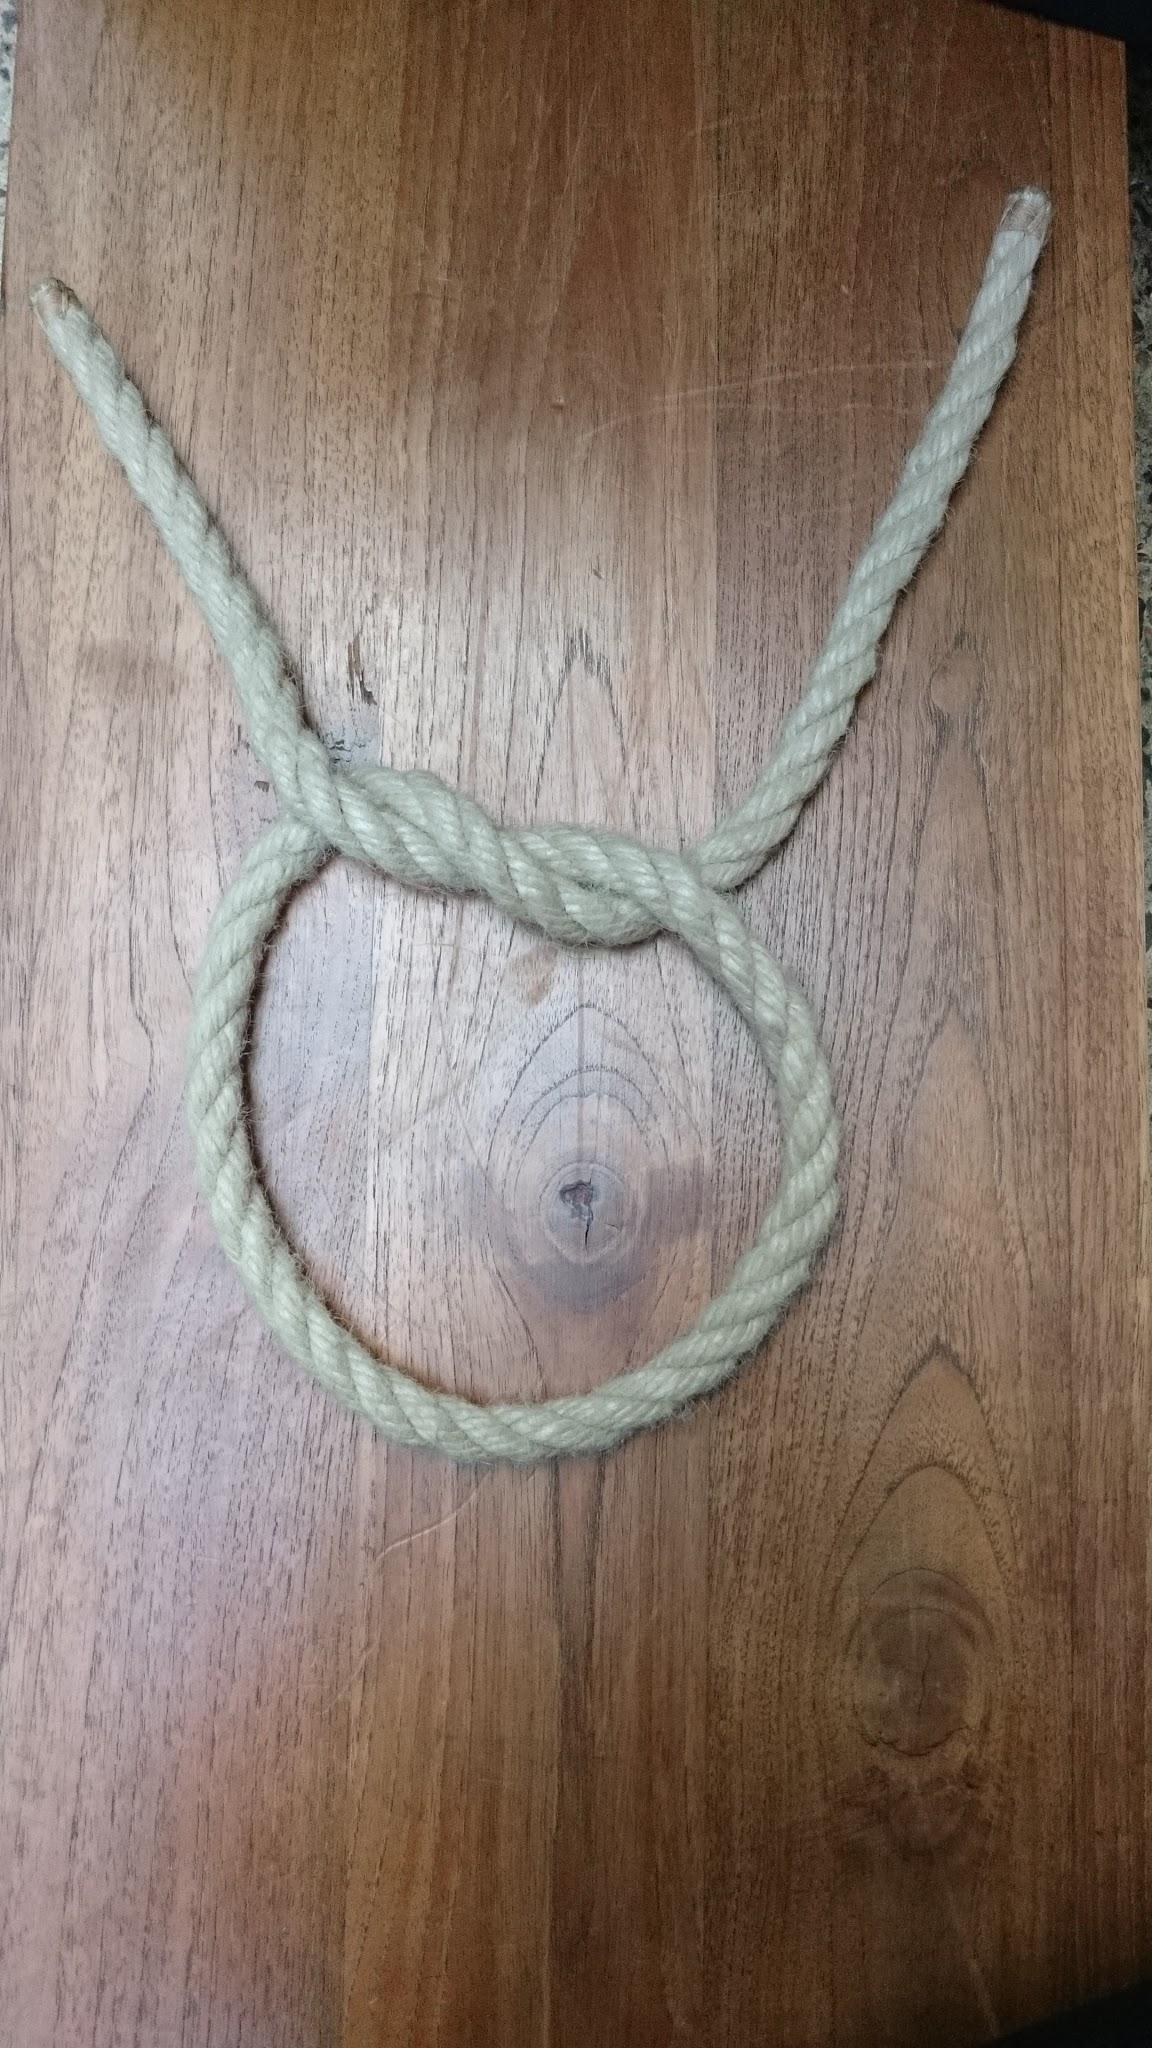 The Reef Knot - Step 3